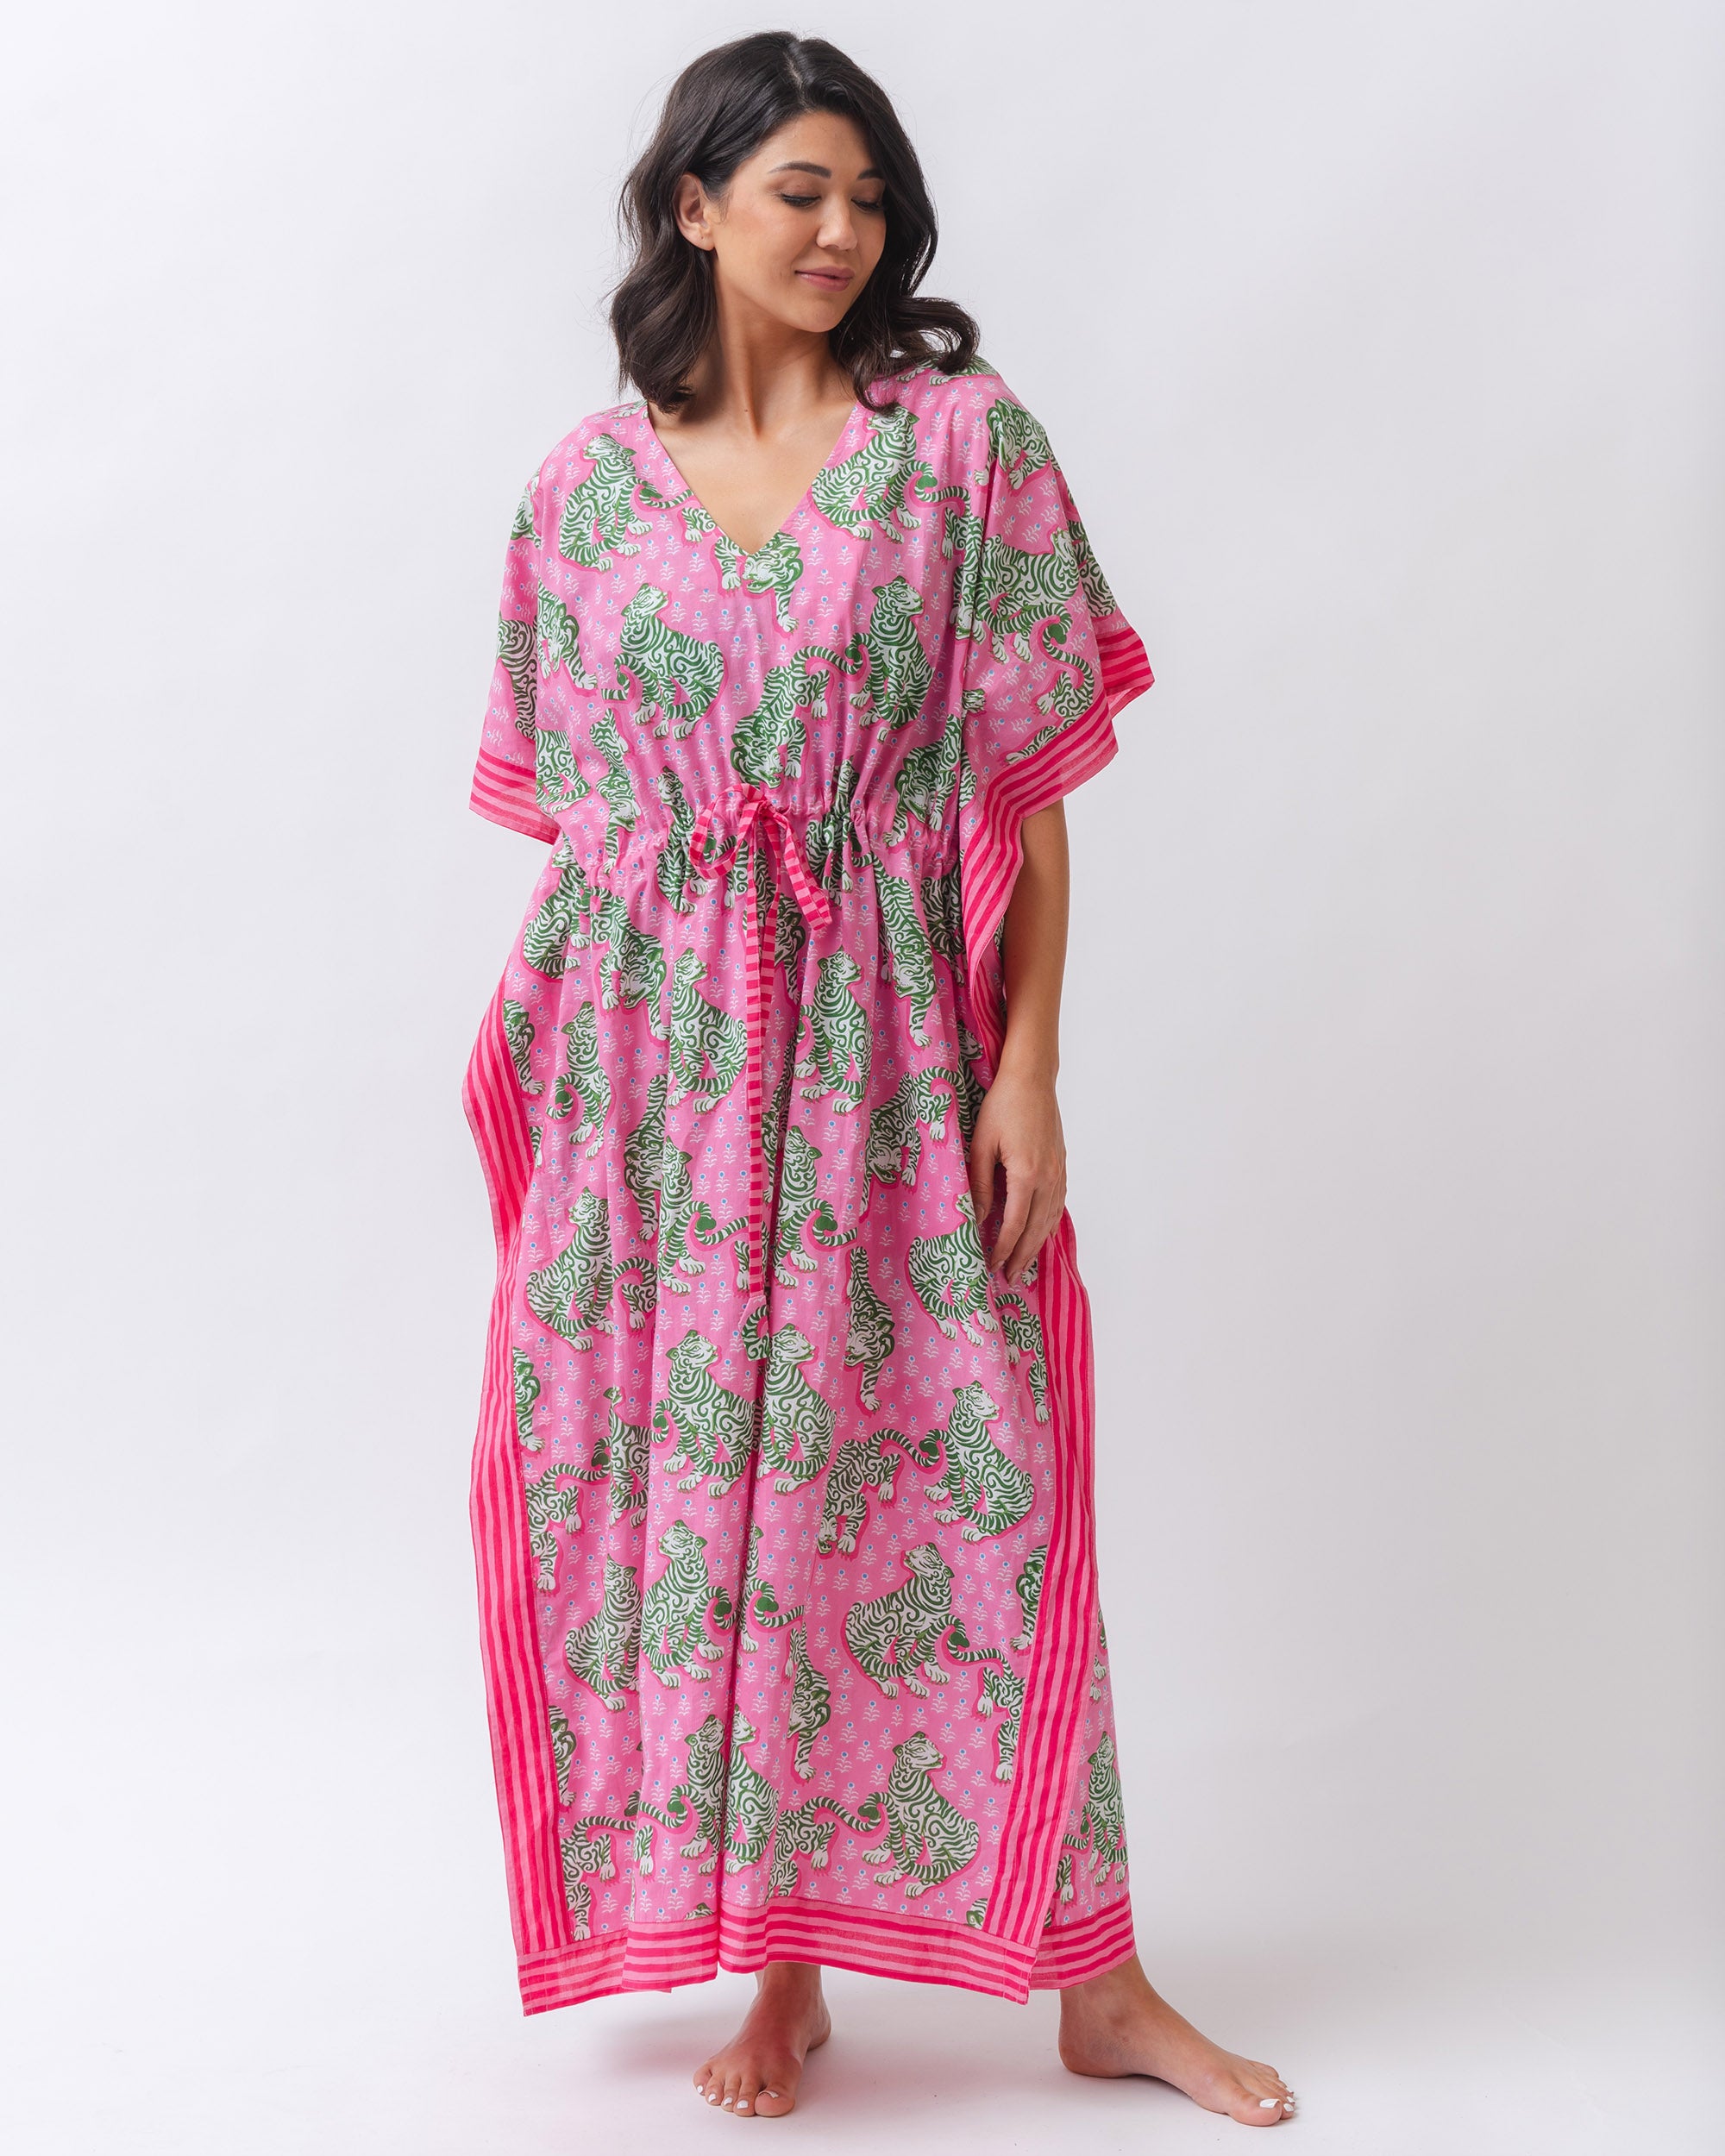 Tiger Queen - Let's Cruise Caftan - Pink Limo - Printfresh